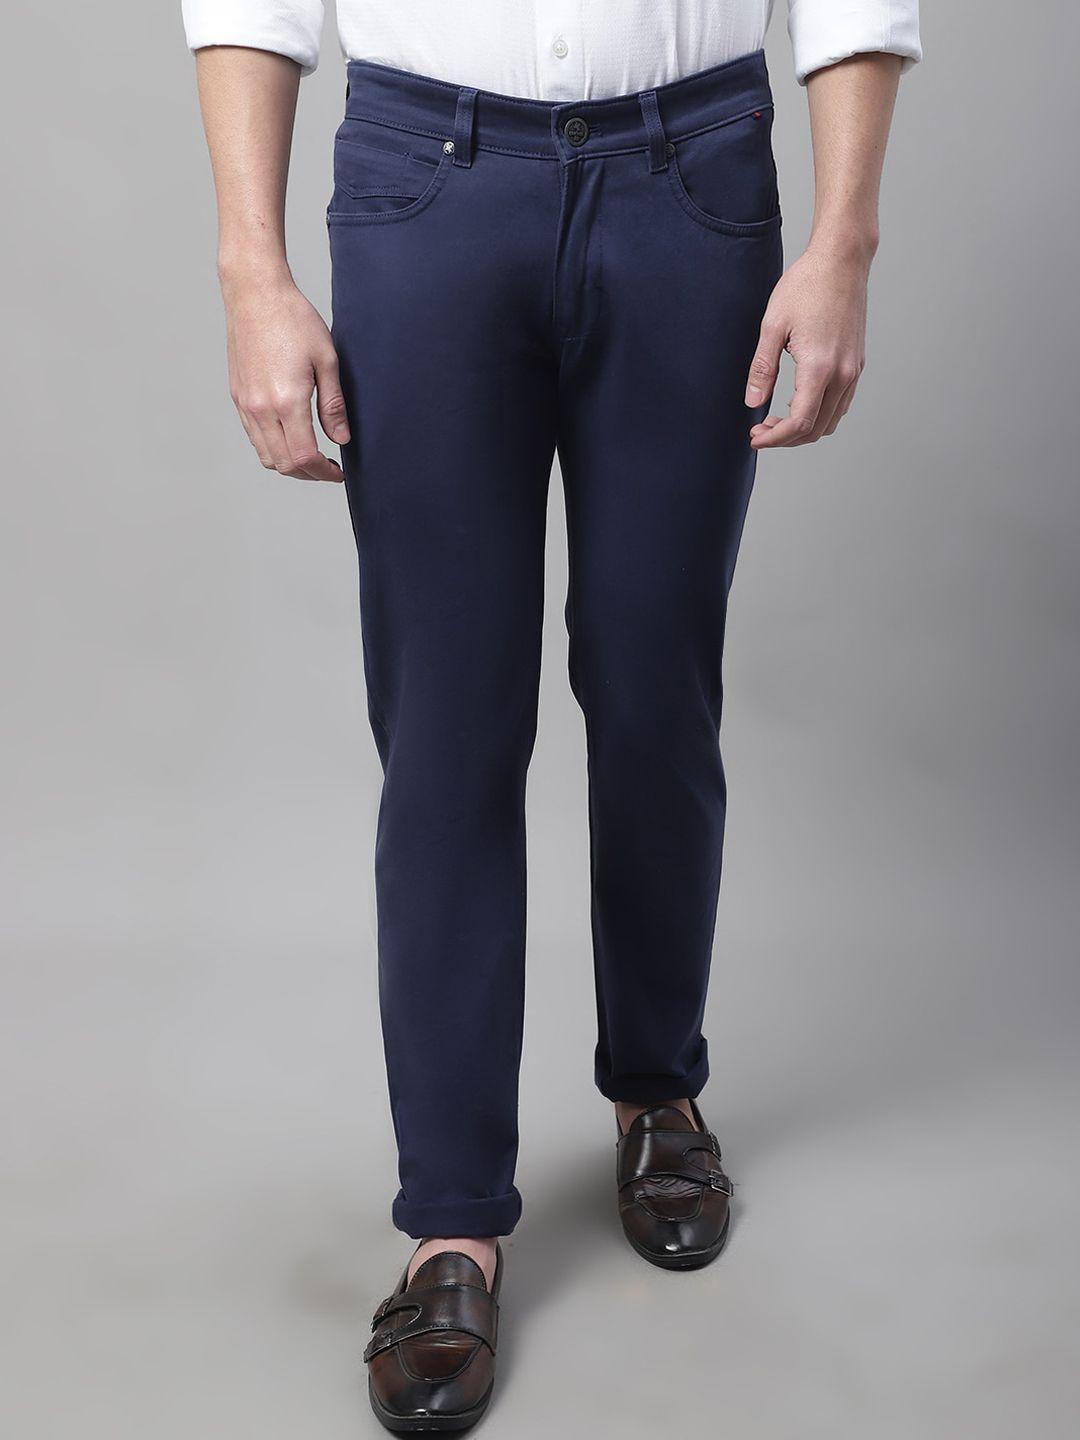 cantabil-men-easy-wash-cotton-chinos-trousers